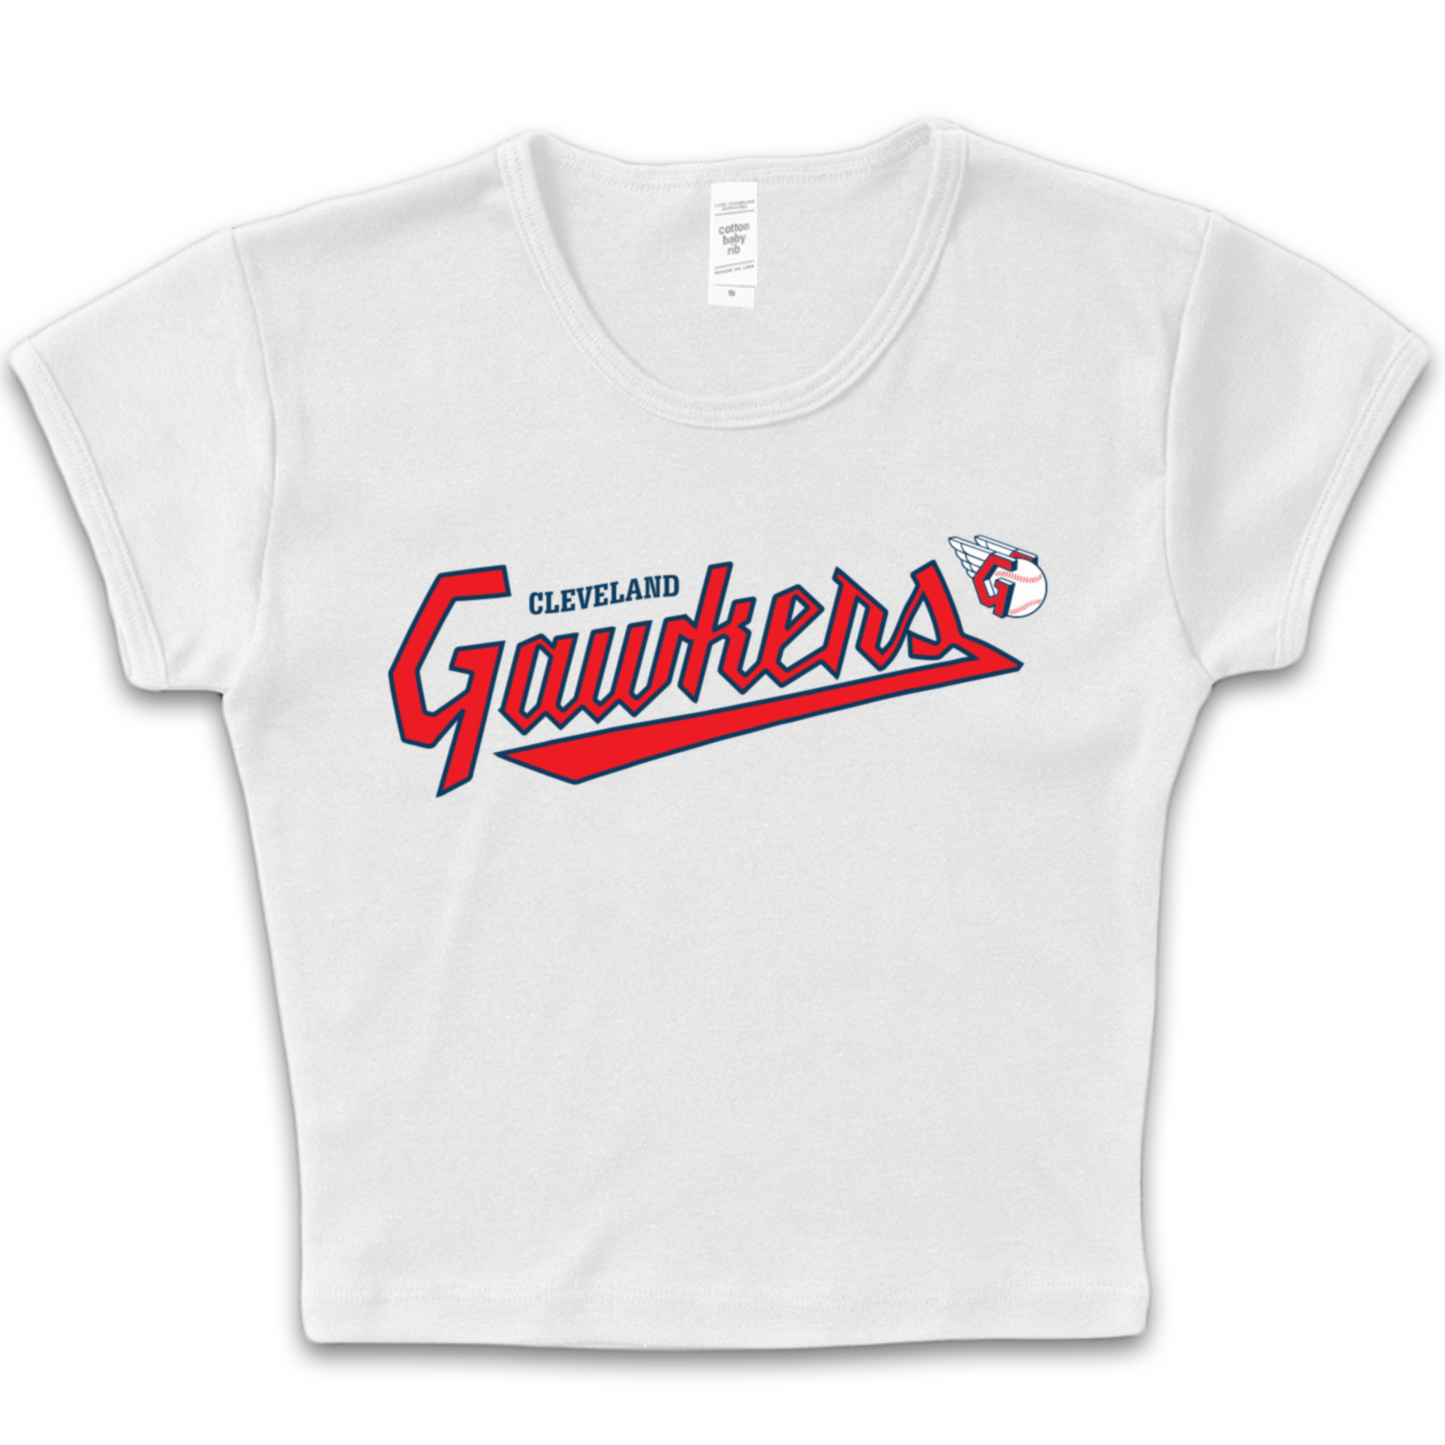 Cleveland Gawkers Baby Tee